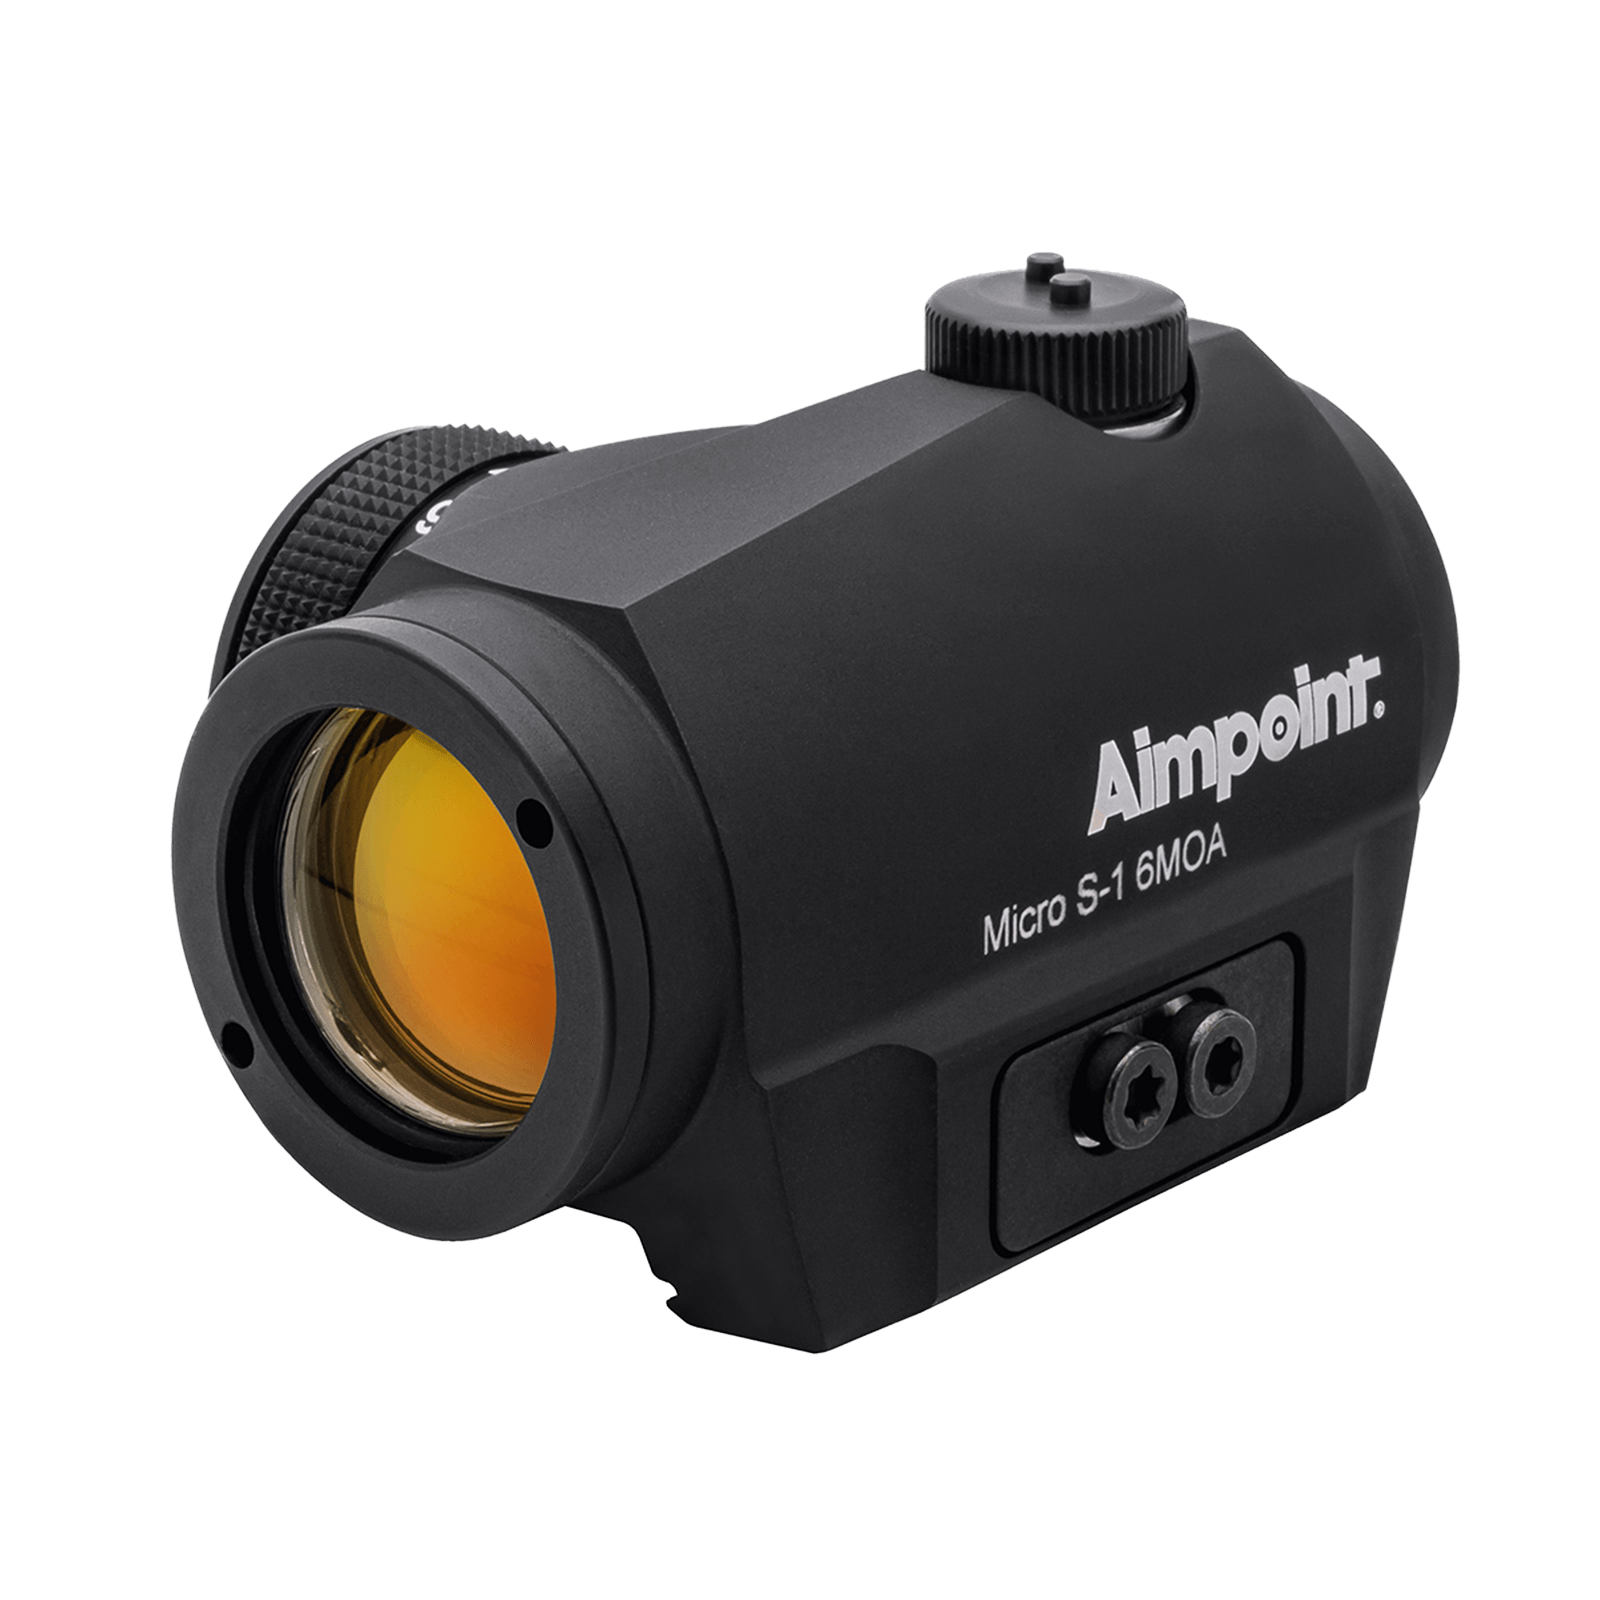 Aimpoin Micro S-1